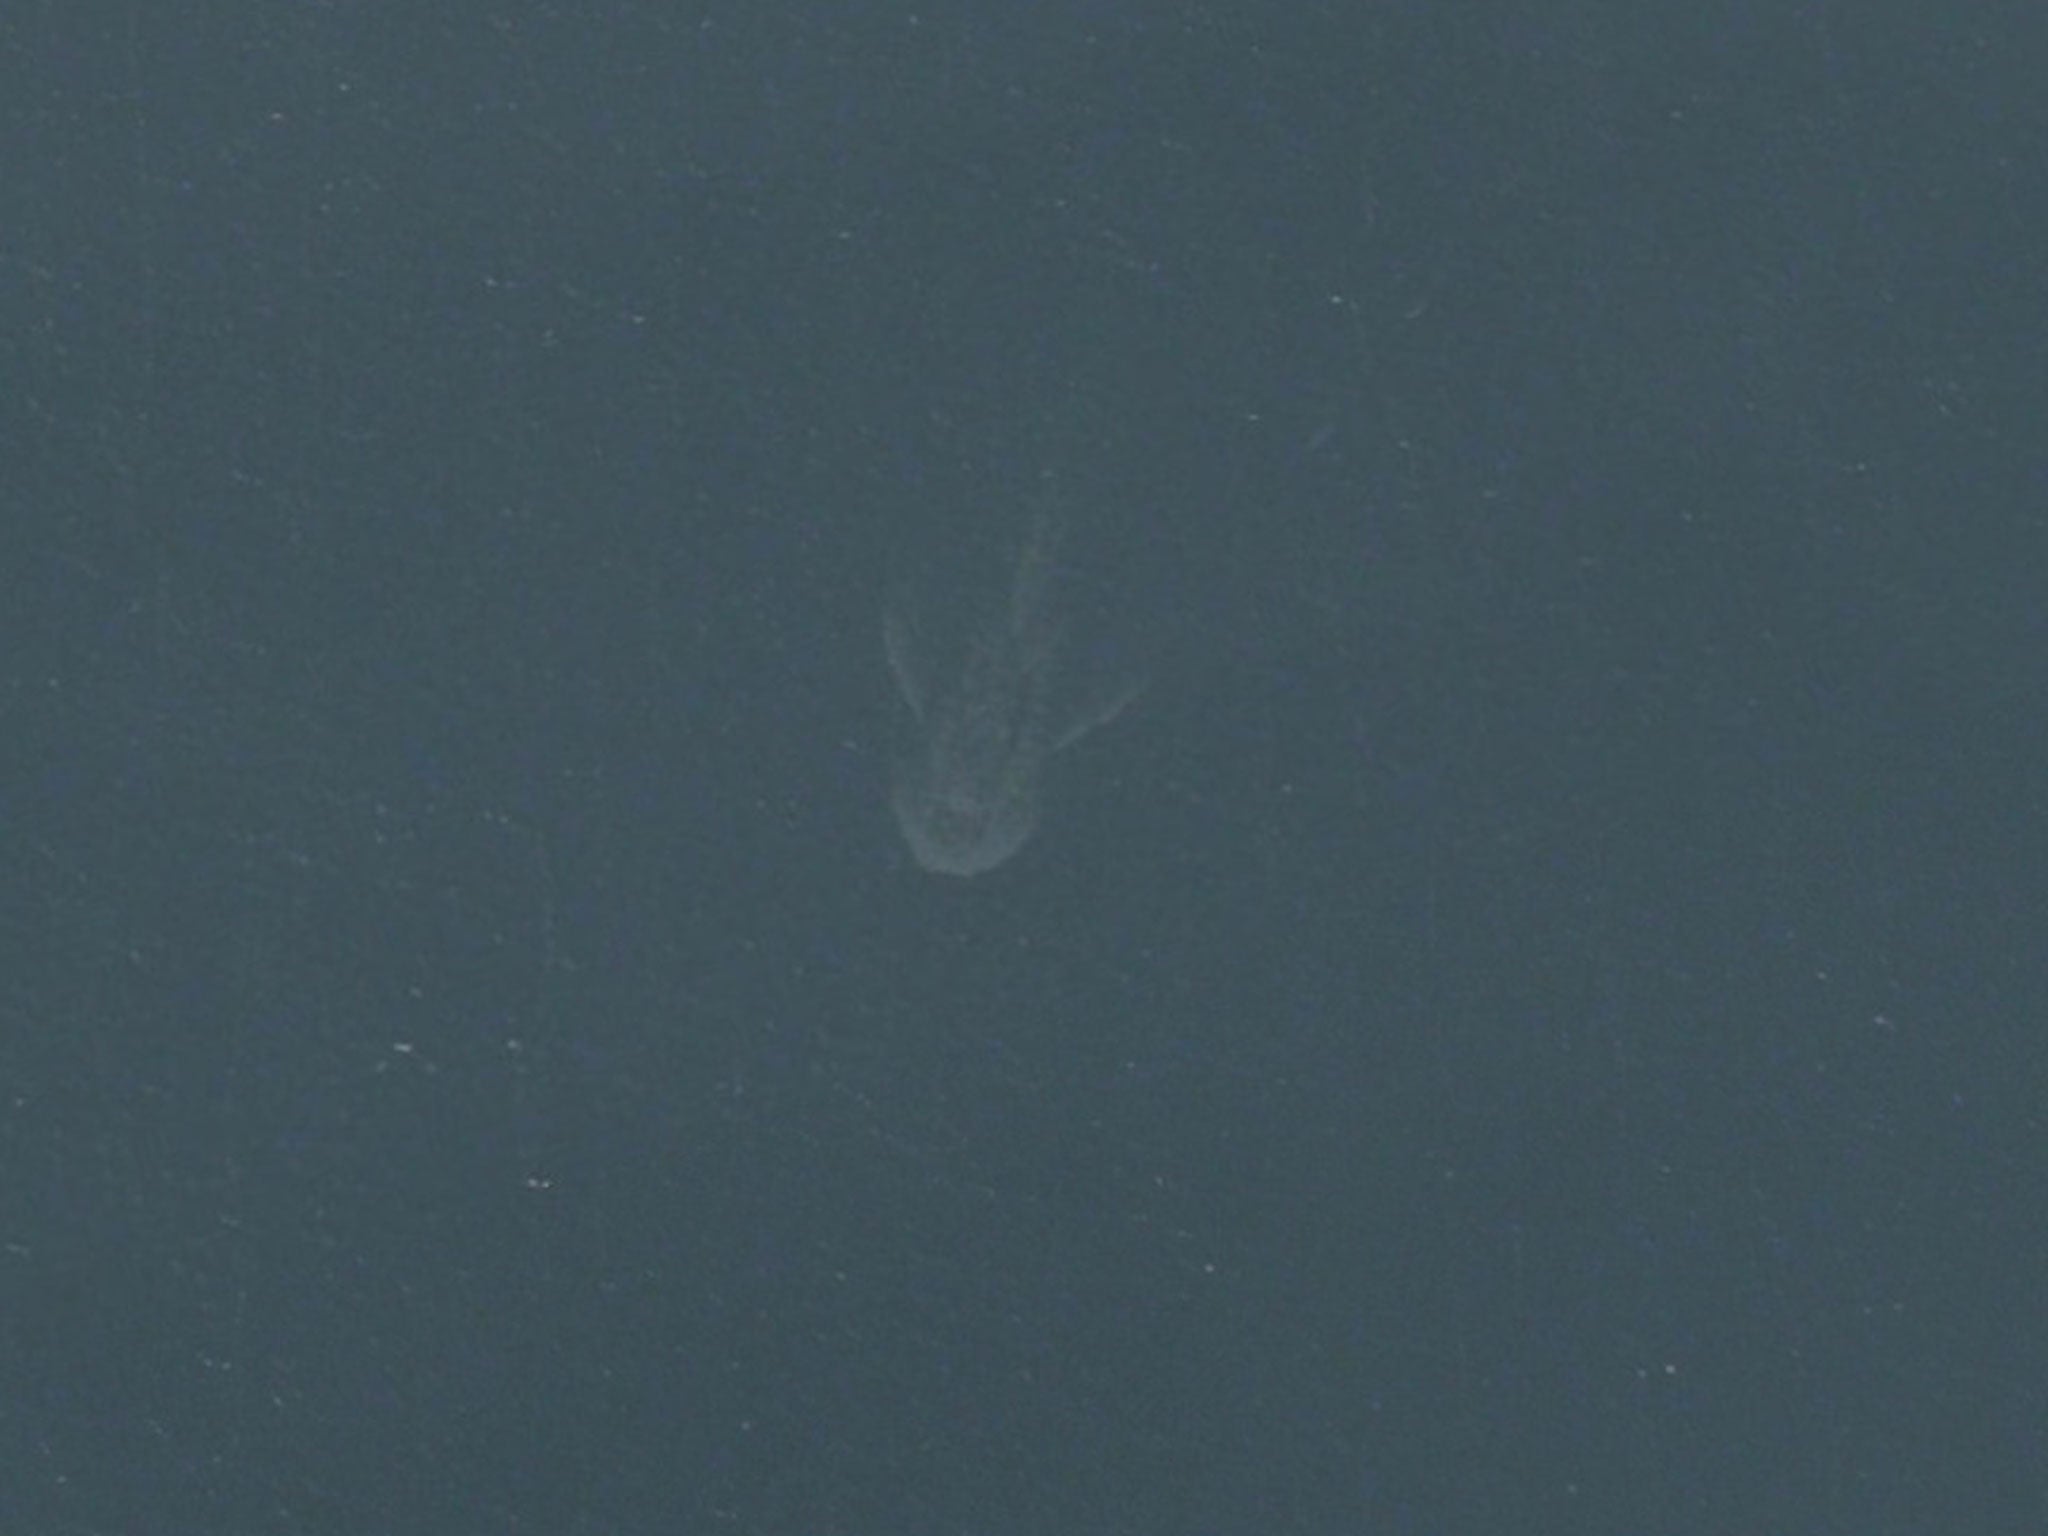 An image from Apple Maps, which has been interpreted as the Loch Ness monster in the Scottish Highlands